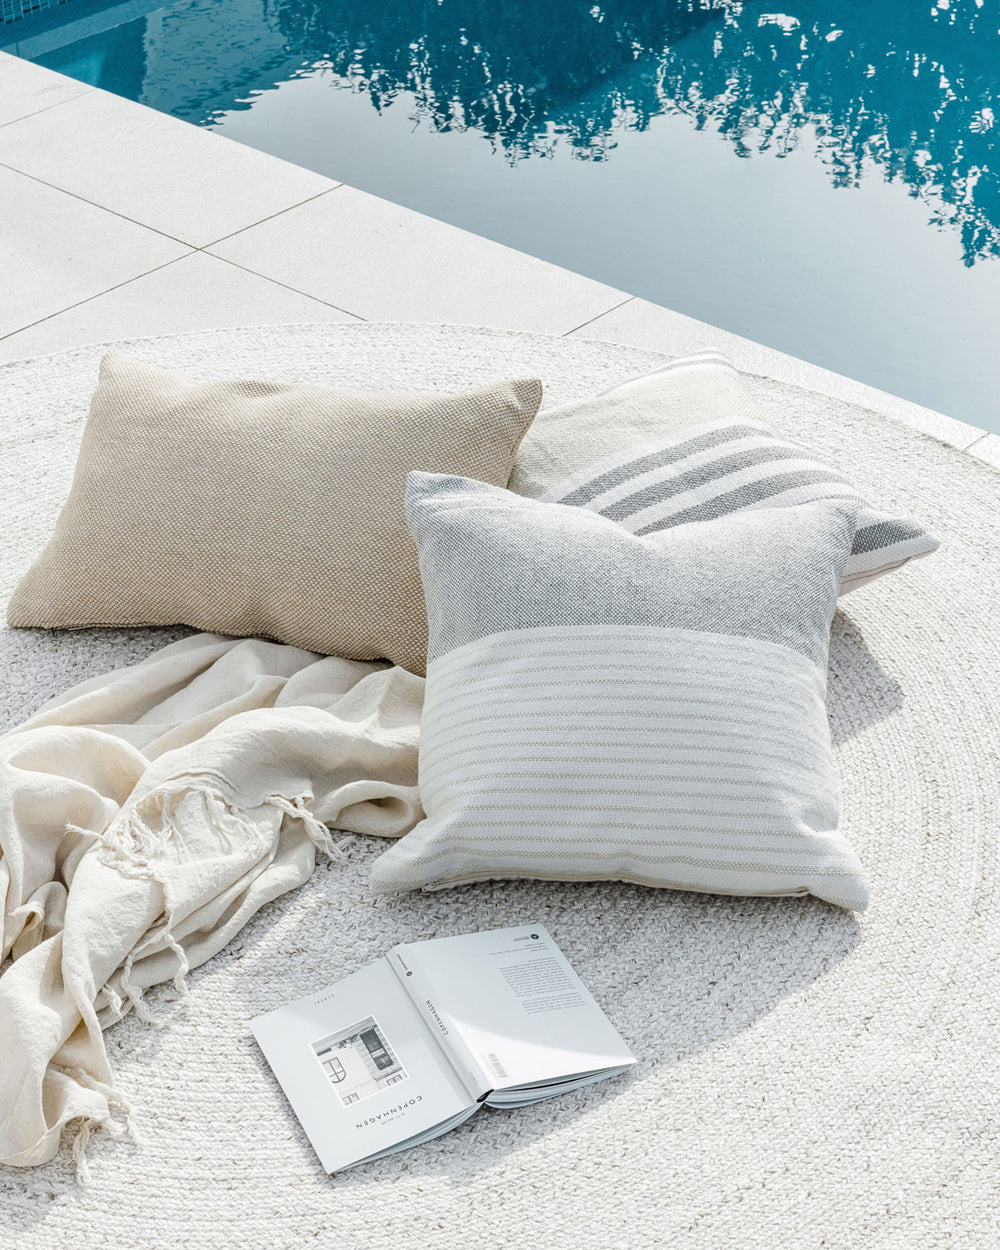 Willett outdoor cushion with the verdi on a mat beside the pool